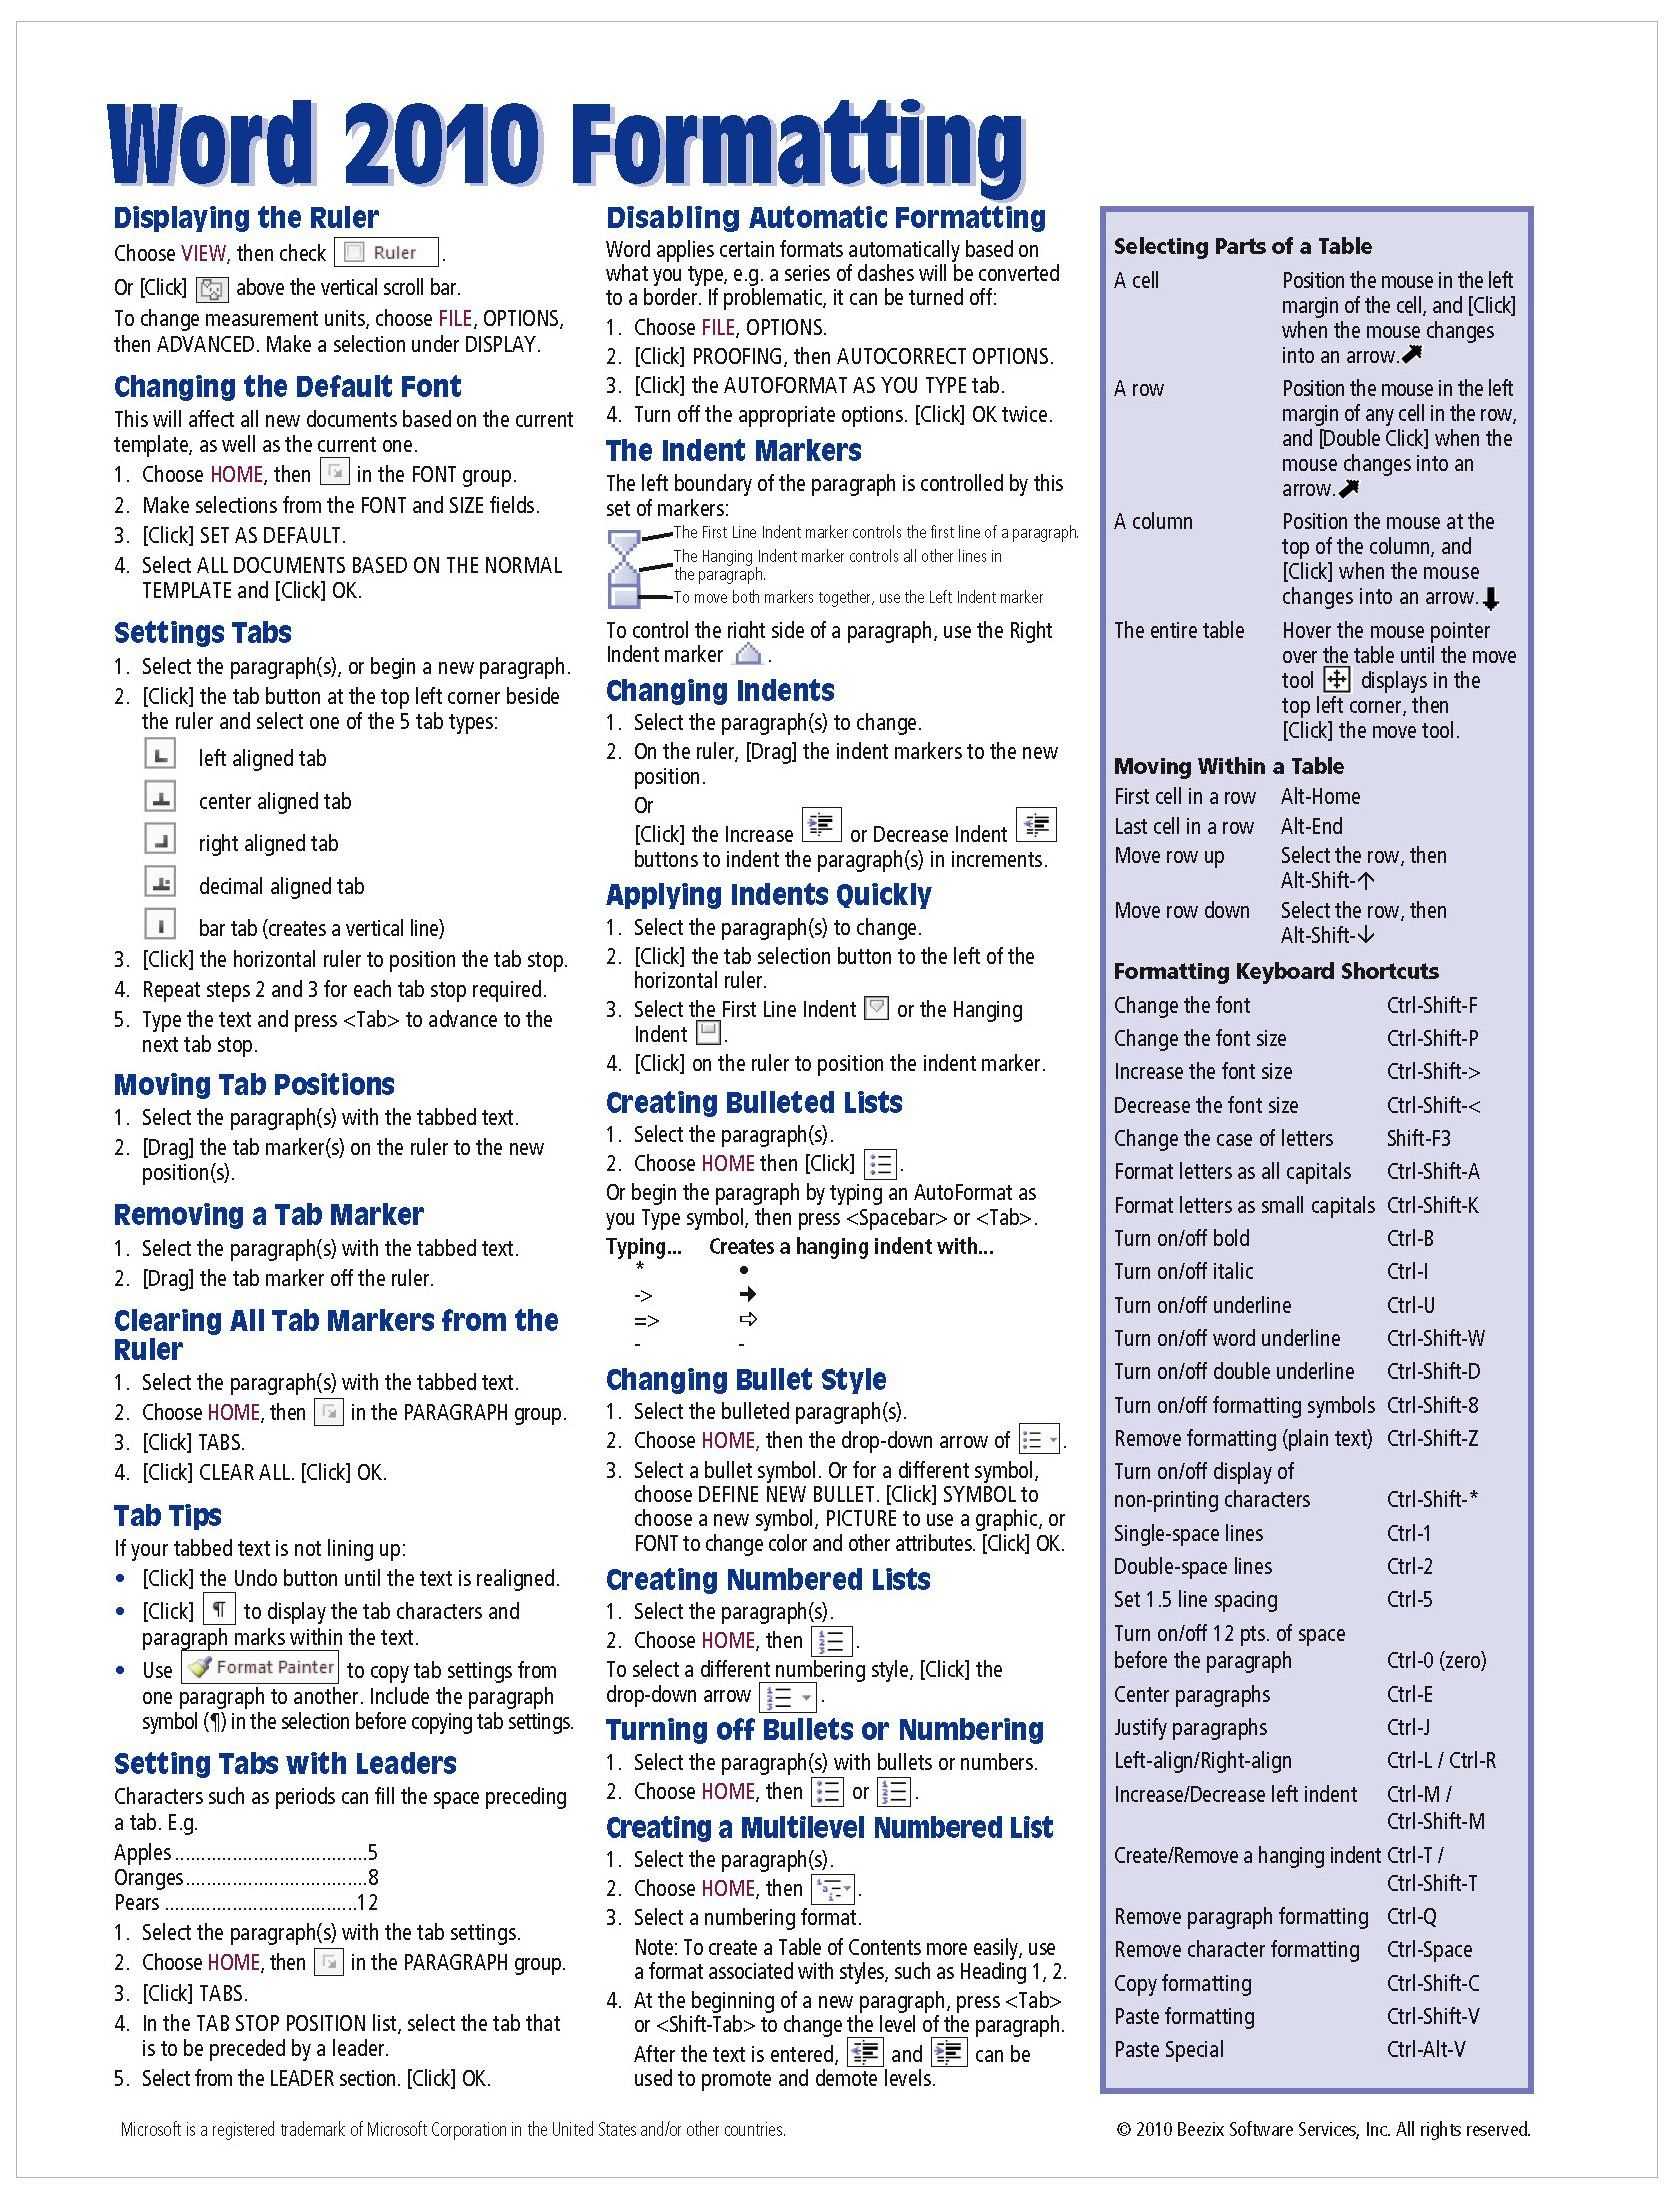 Microsoft Word 2010 Formatting Quick Reference Guide (Cheat With Cheat Sheet Template Word